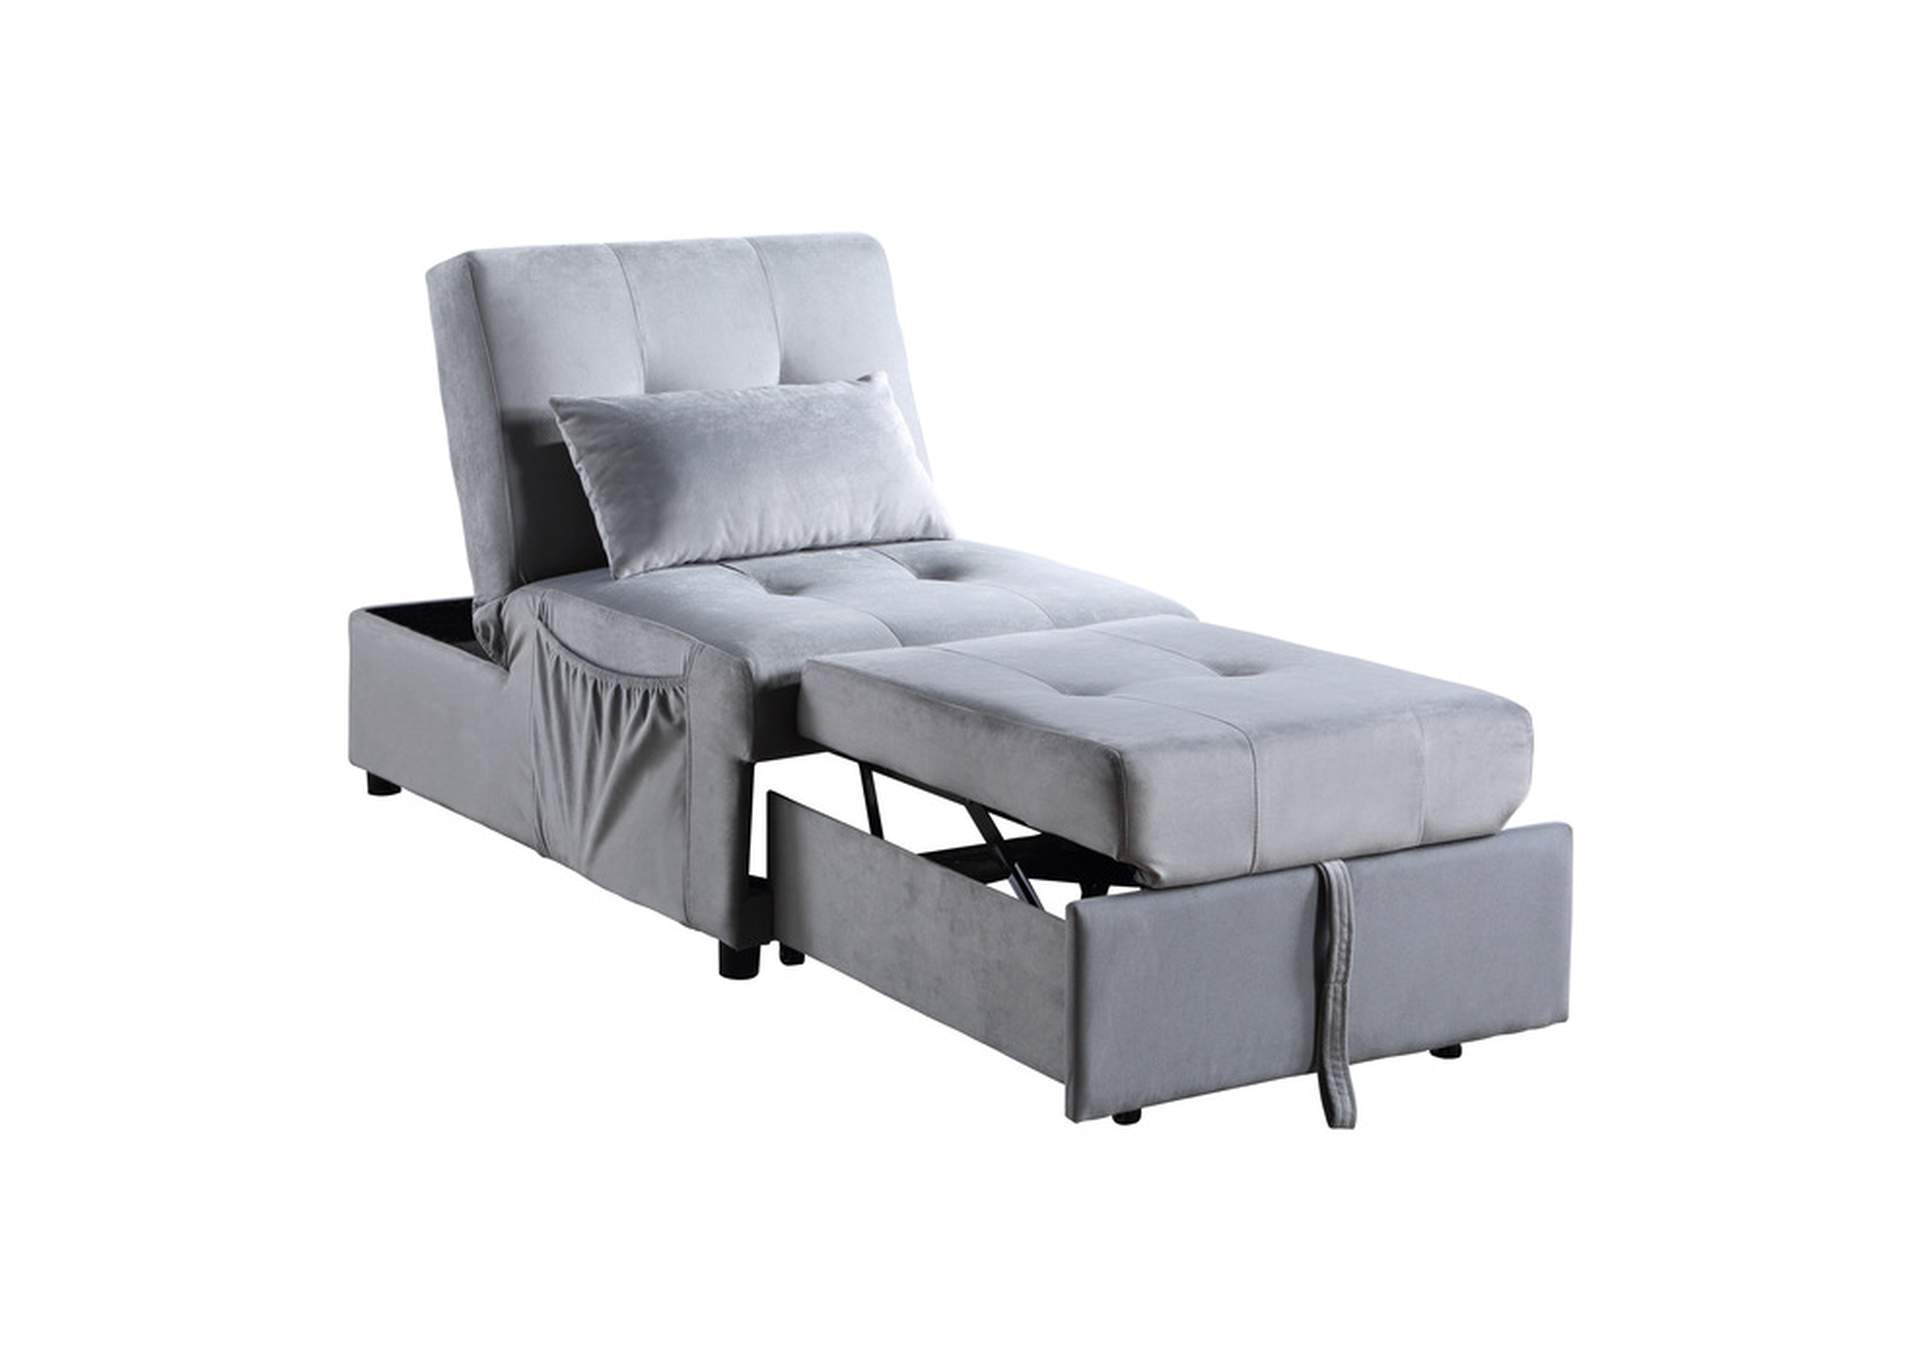 Garrell Lift Top Storage Bench with Pull-out Bed,Homelegance